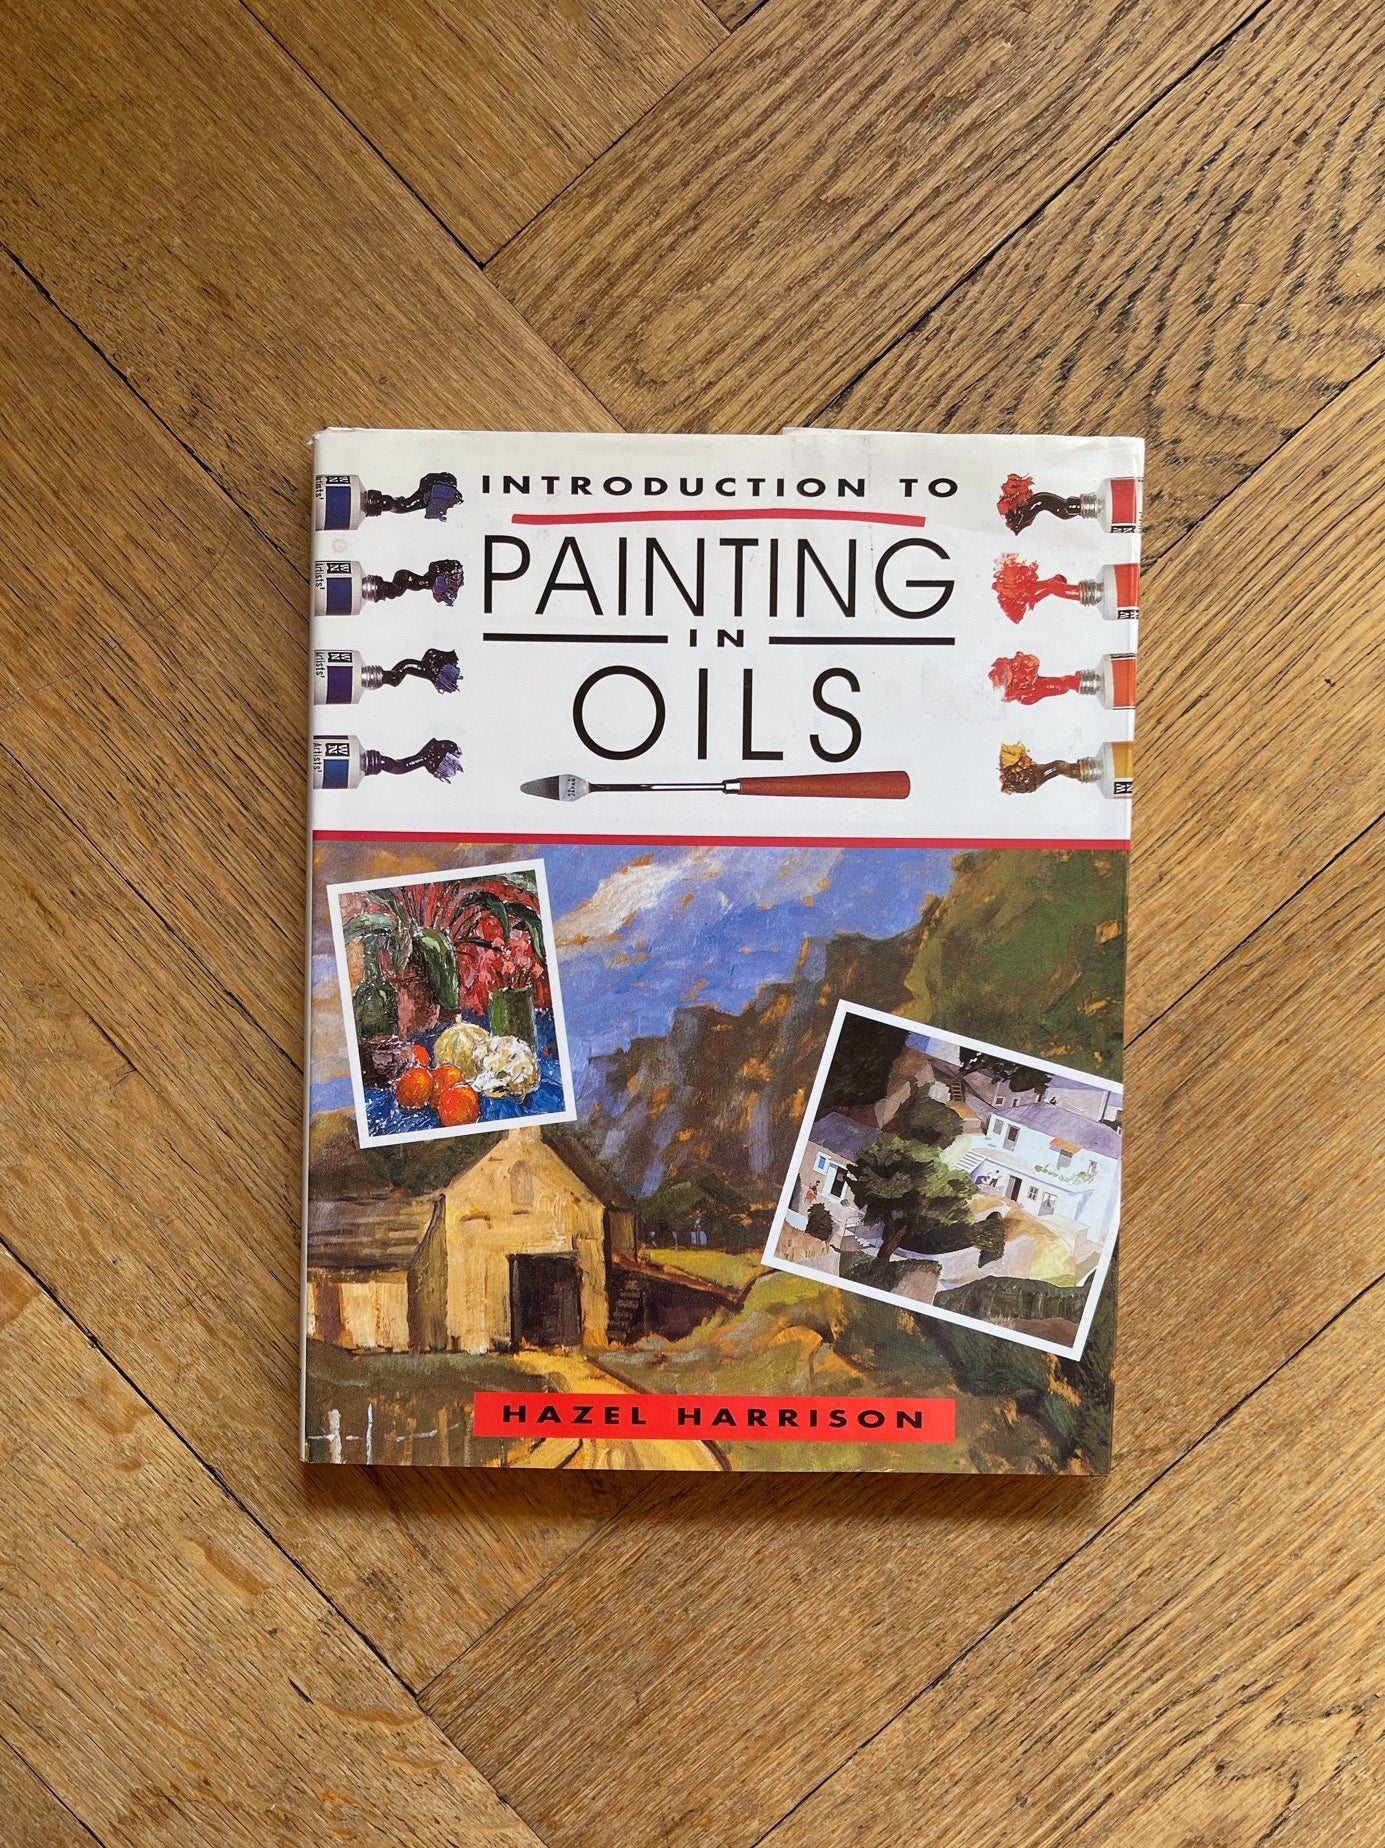 Introduction to Painting in Oils by Hazel Harrison